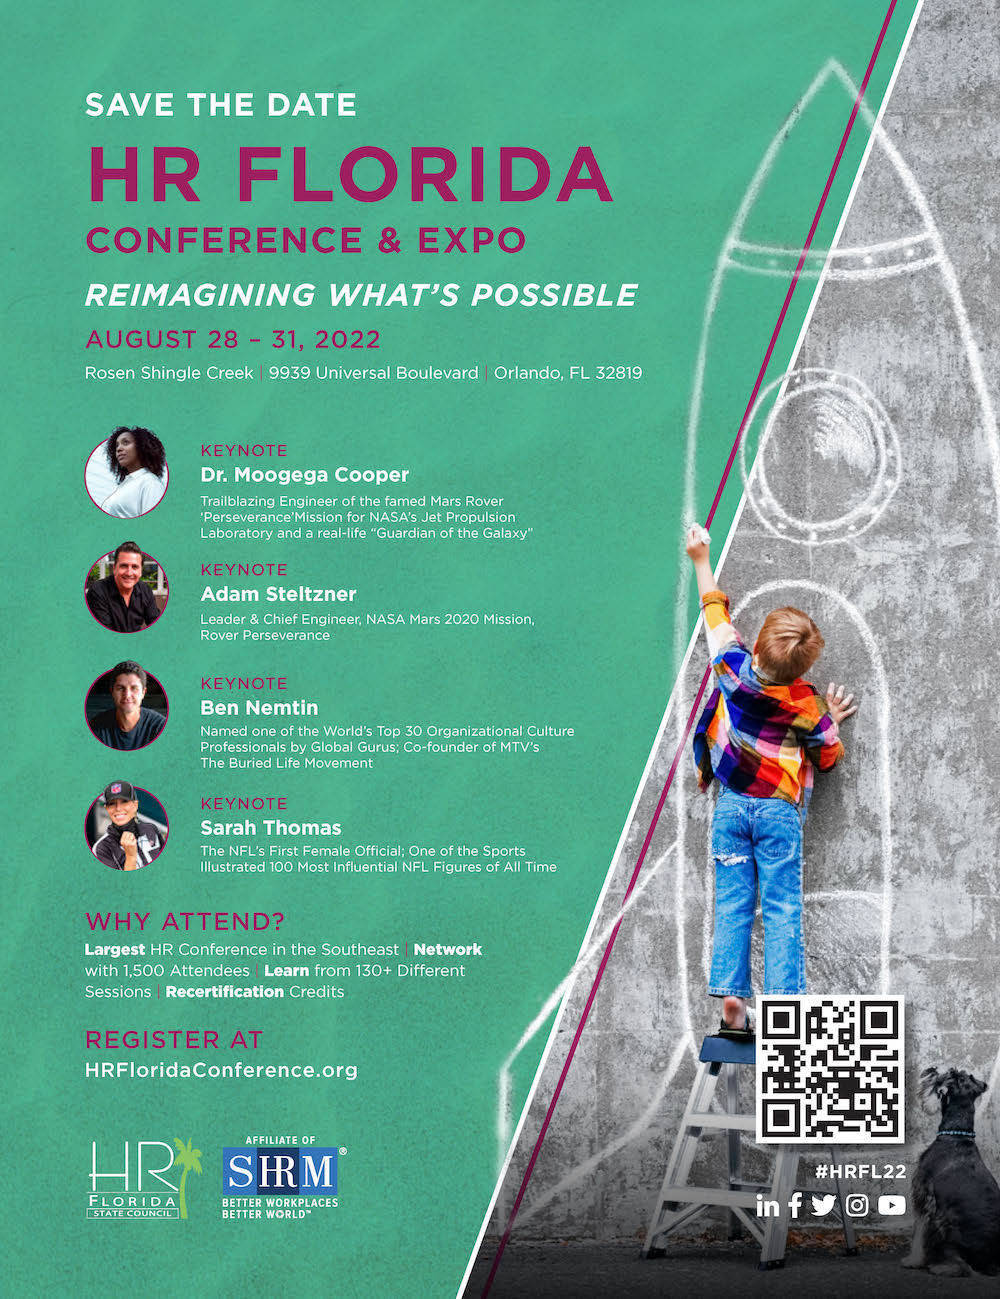 HR Florida Conference & Expo in Orlando August 2830